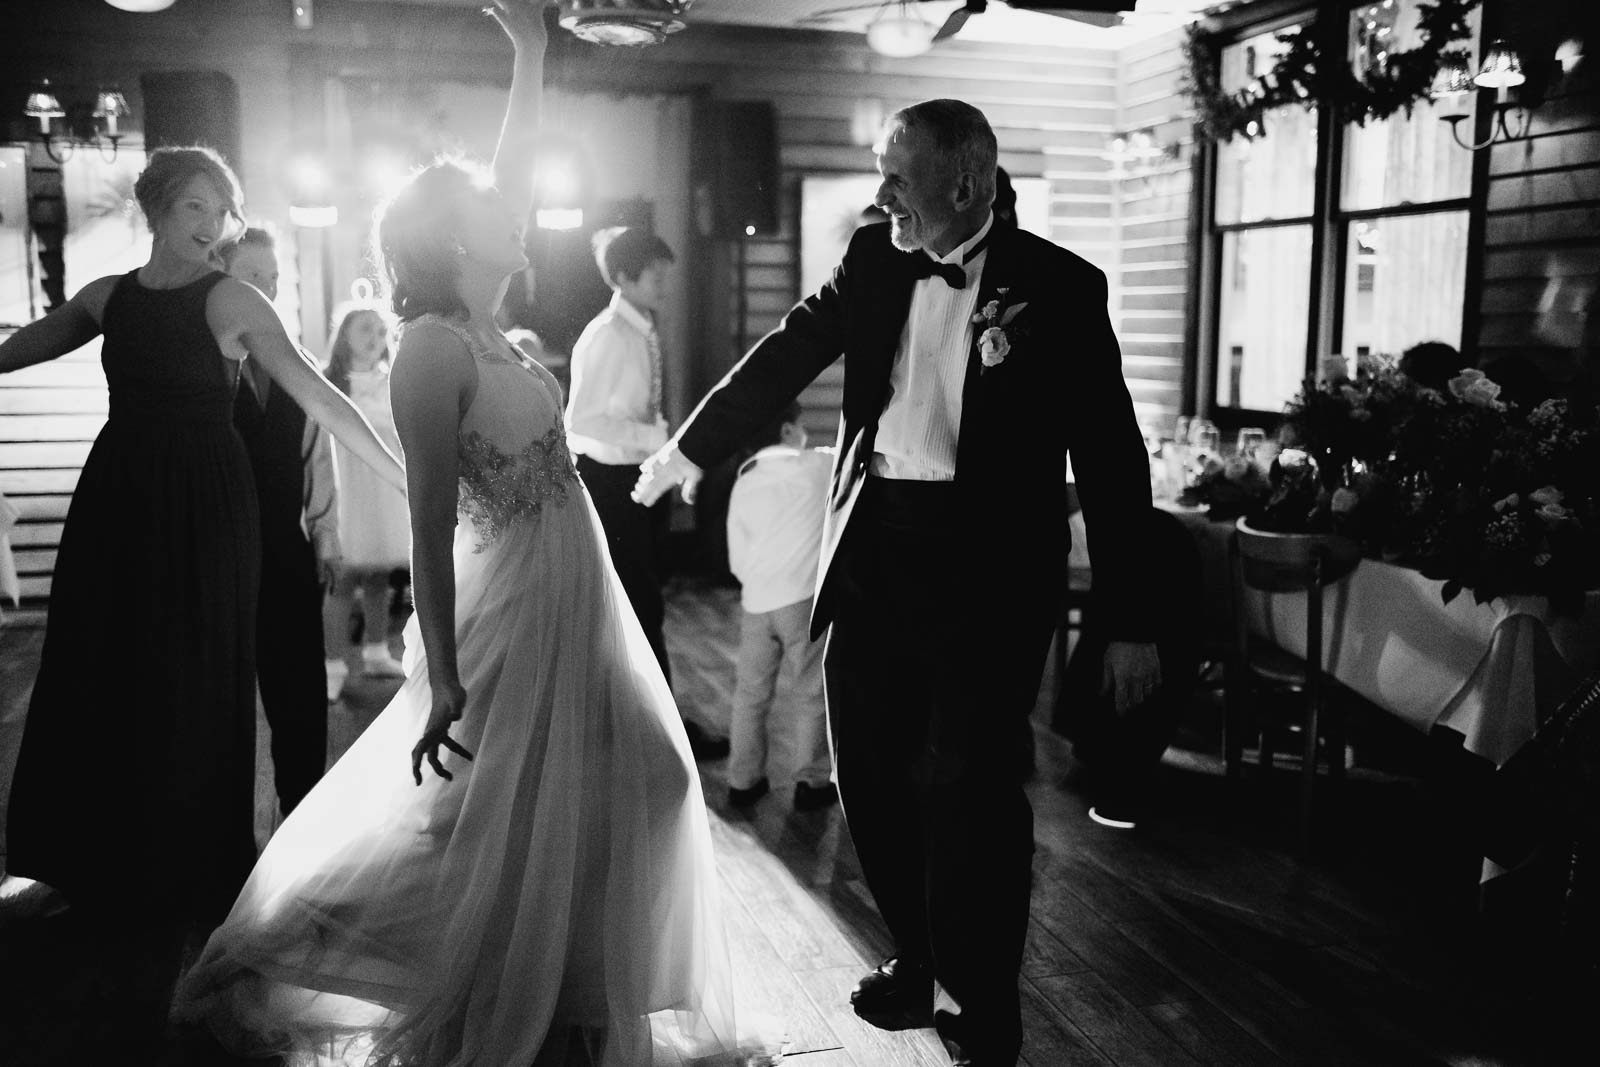 Father of the bride dance with DJ lights backlighting the brides dress